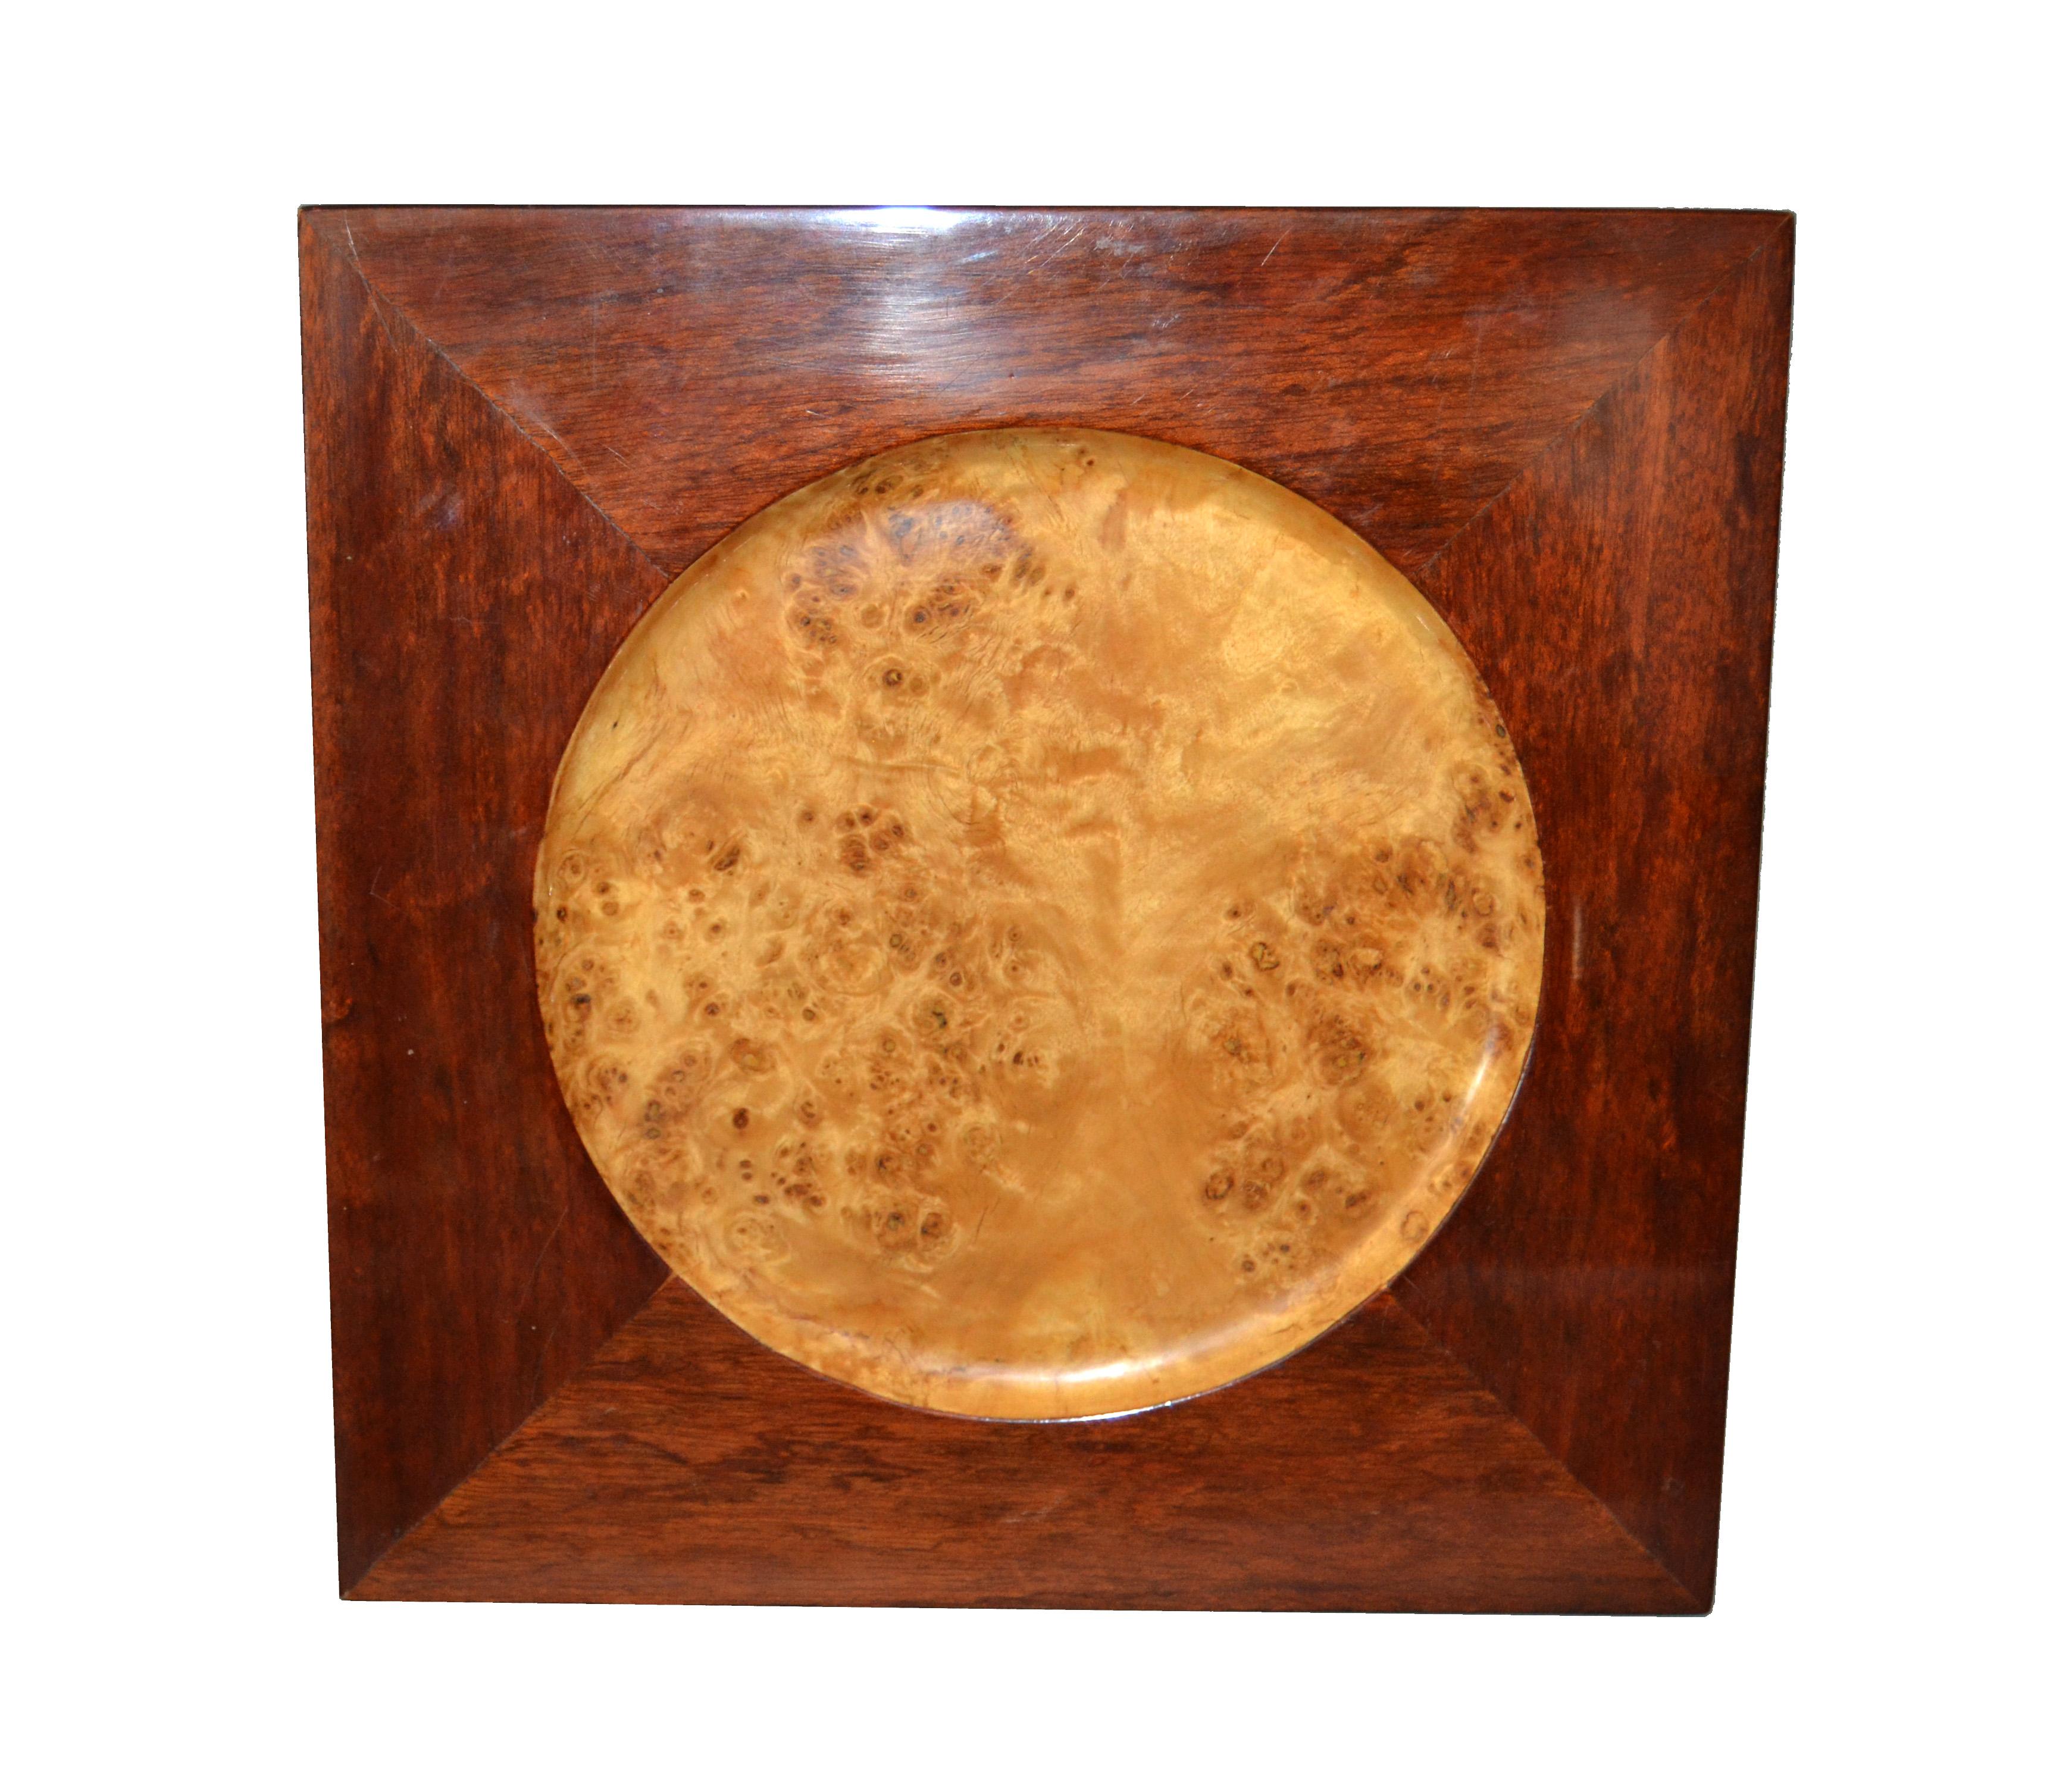 Vintage decorative burl wood over mahogany plate or centerpiece.
The plate has a gloss finish and it is signed by the unknown artist.
Can be used for your favorite nuts or fruit.